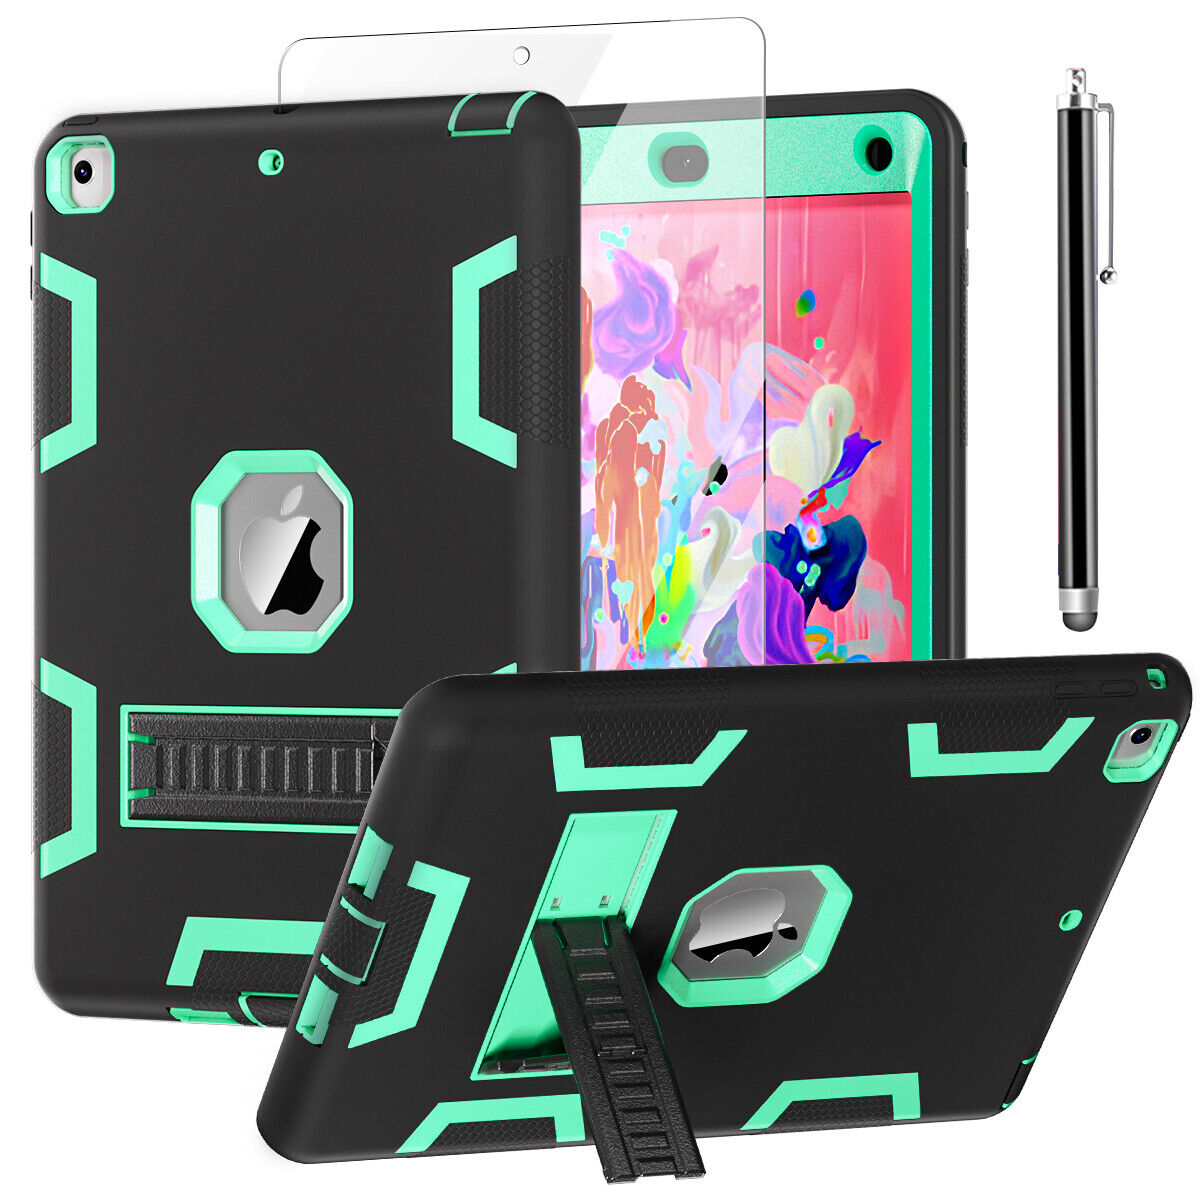 For iPad 6th/5th Generation Case 9.7